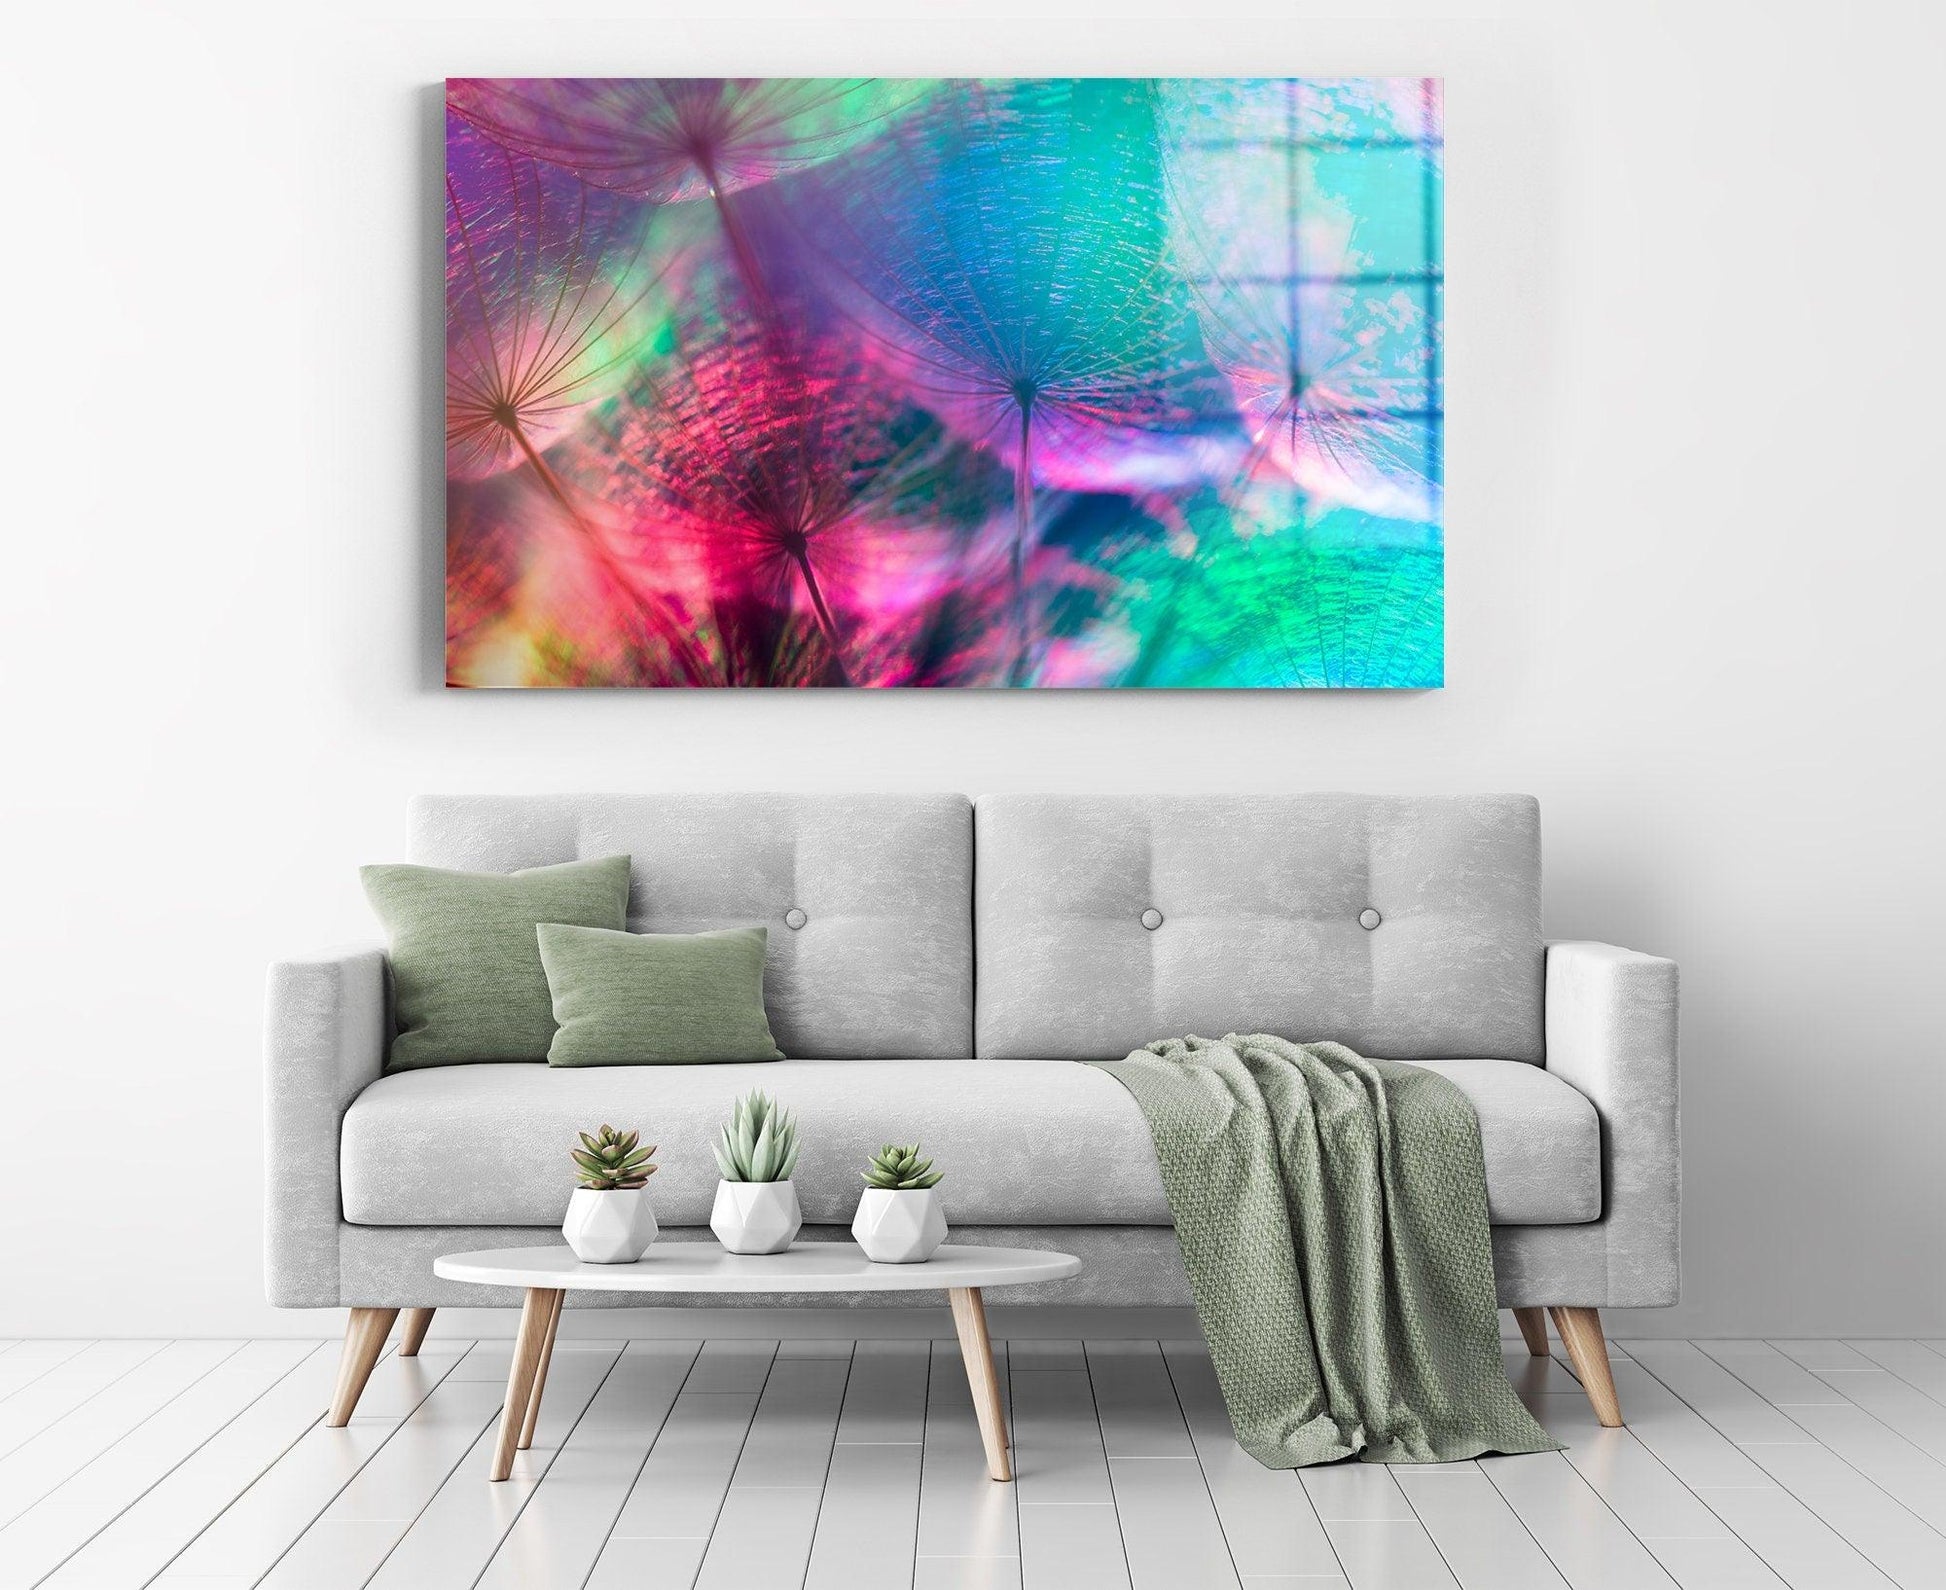 abstract colored wall art| Wall Hanging for Home Decor, Housewarming Gift, minimalist colorful glass wall decor, green and pink canvas art - TrendiArt